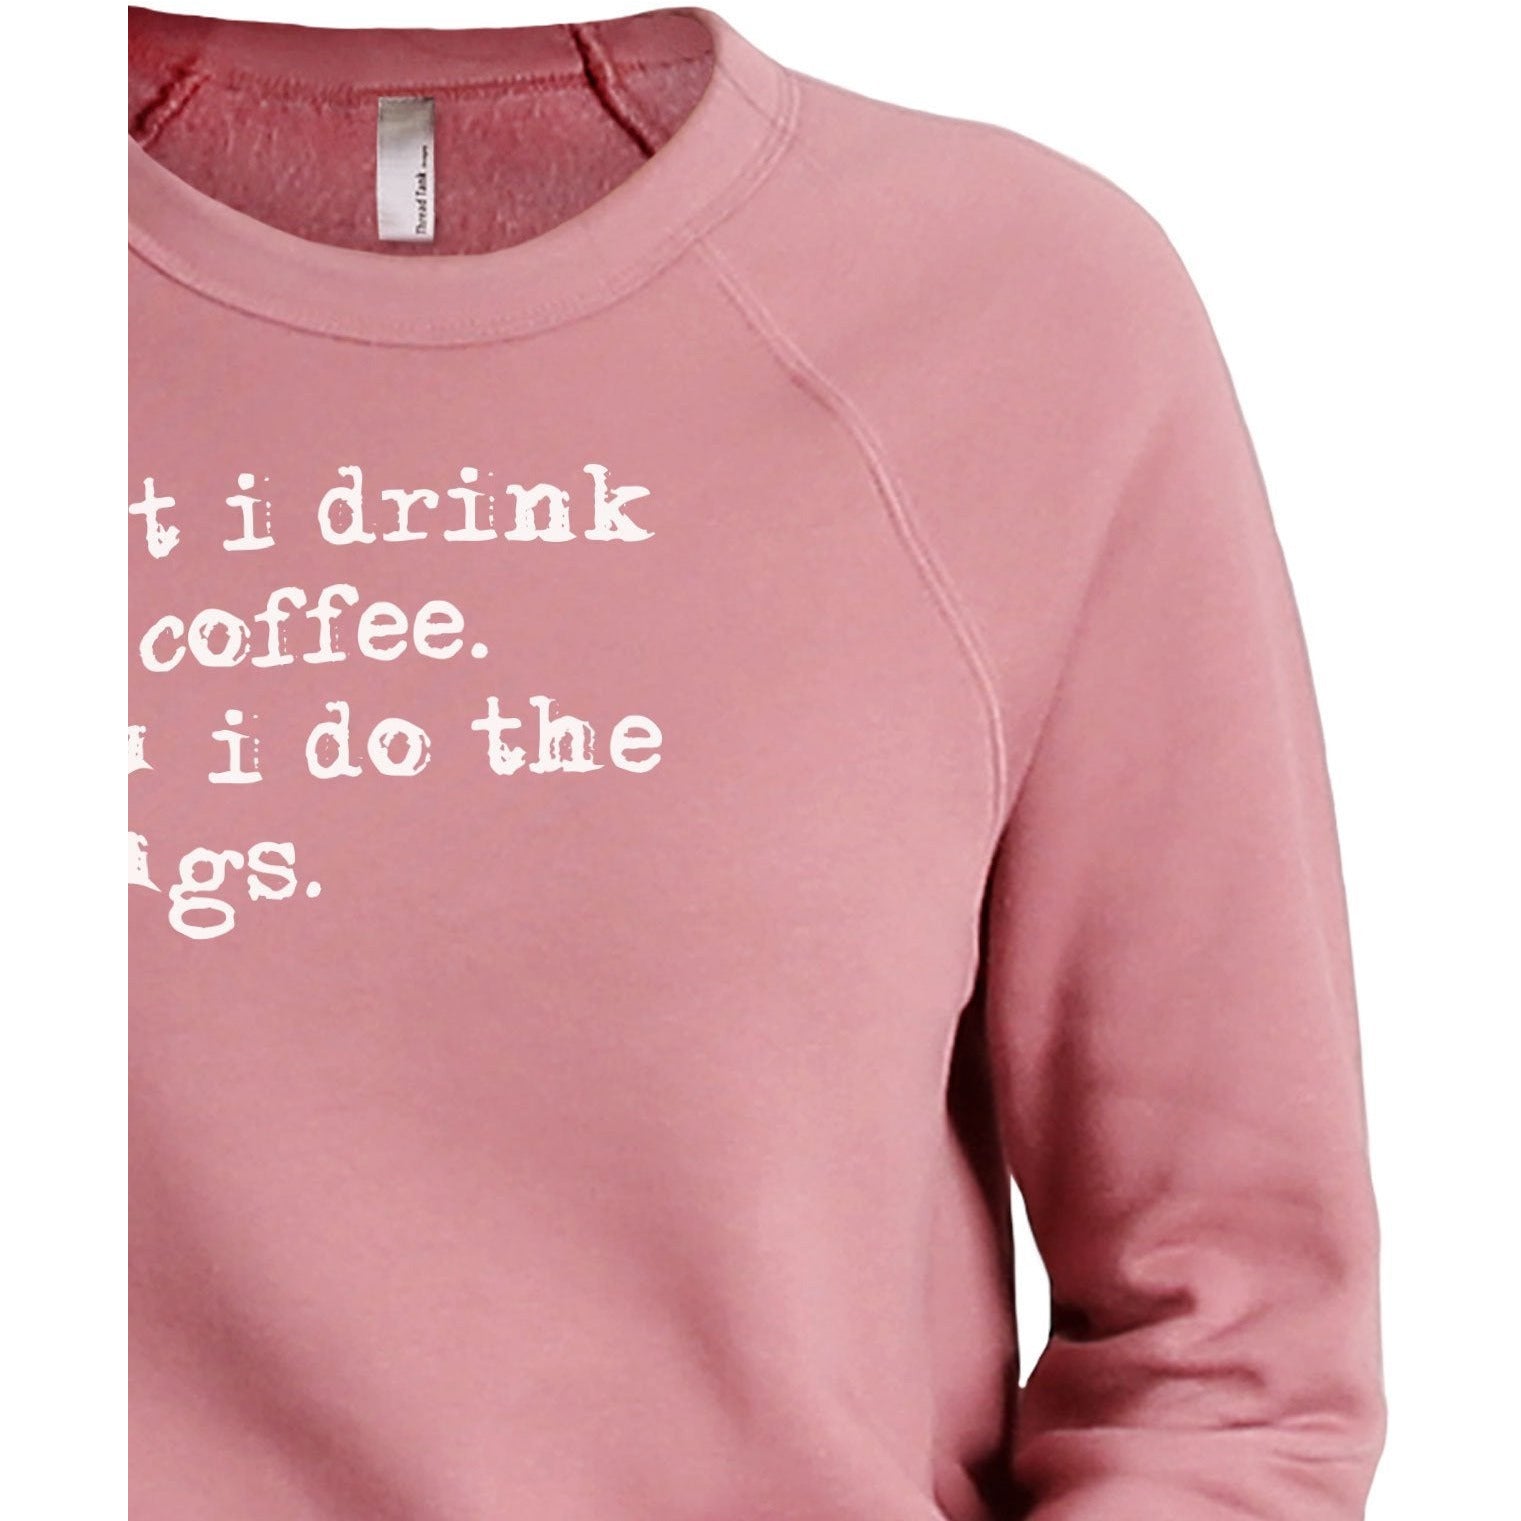 First I Drink The Coffee Then I Do The Things Women's Cozy Fleece Longsleeves Sweater Rouge FRONT